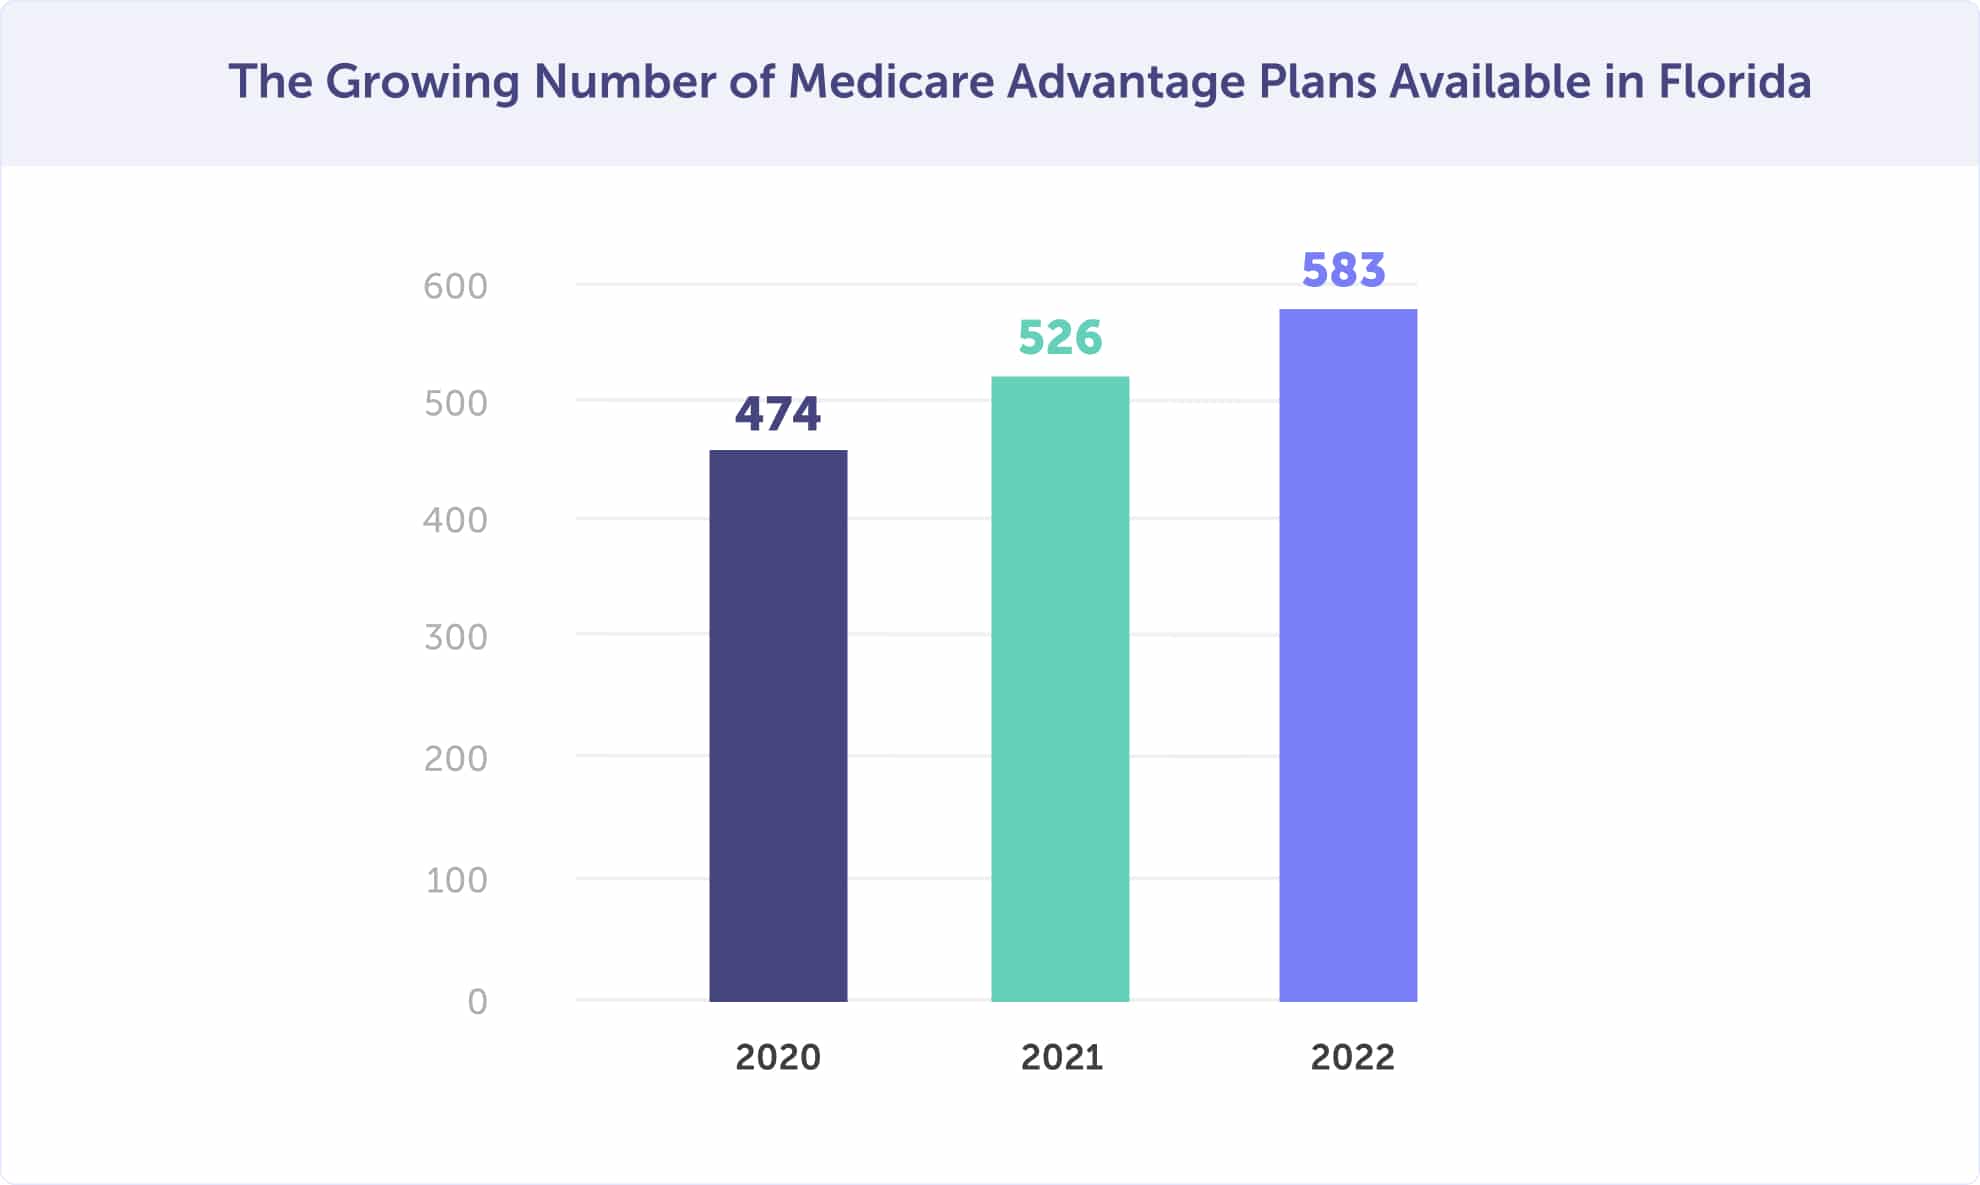 Number of Medicare Advantage plans available in Florida